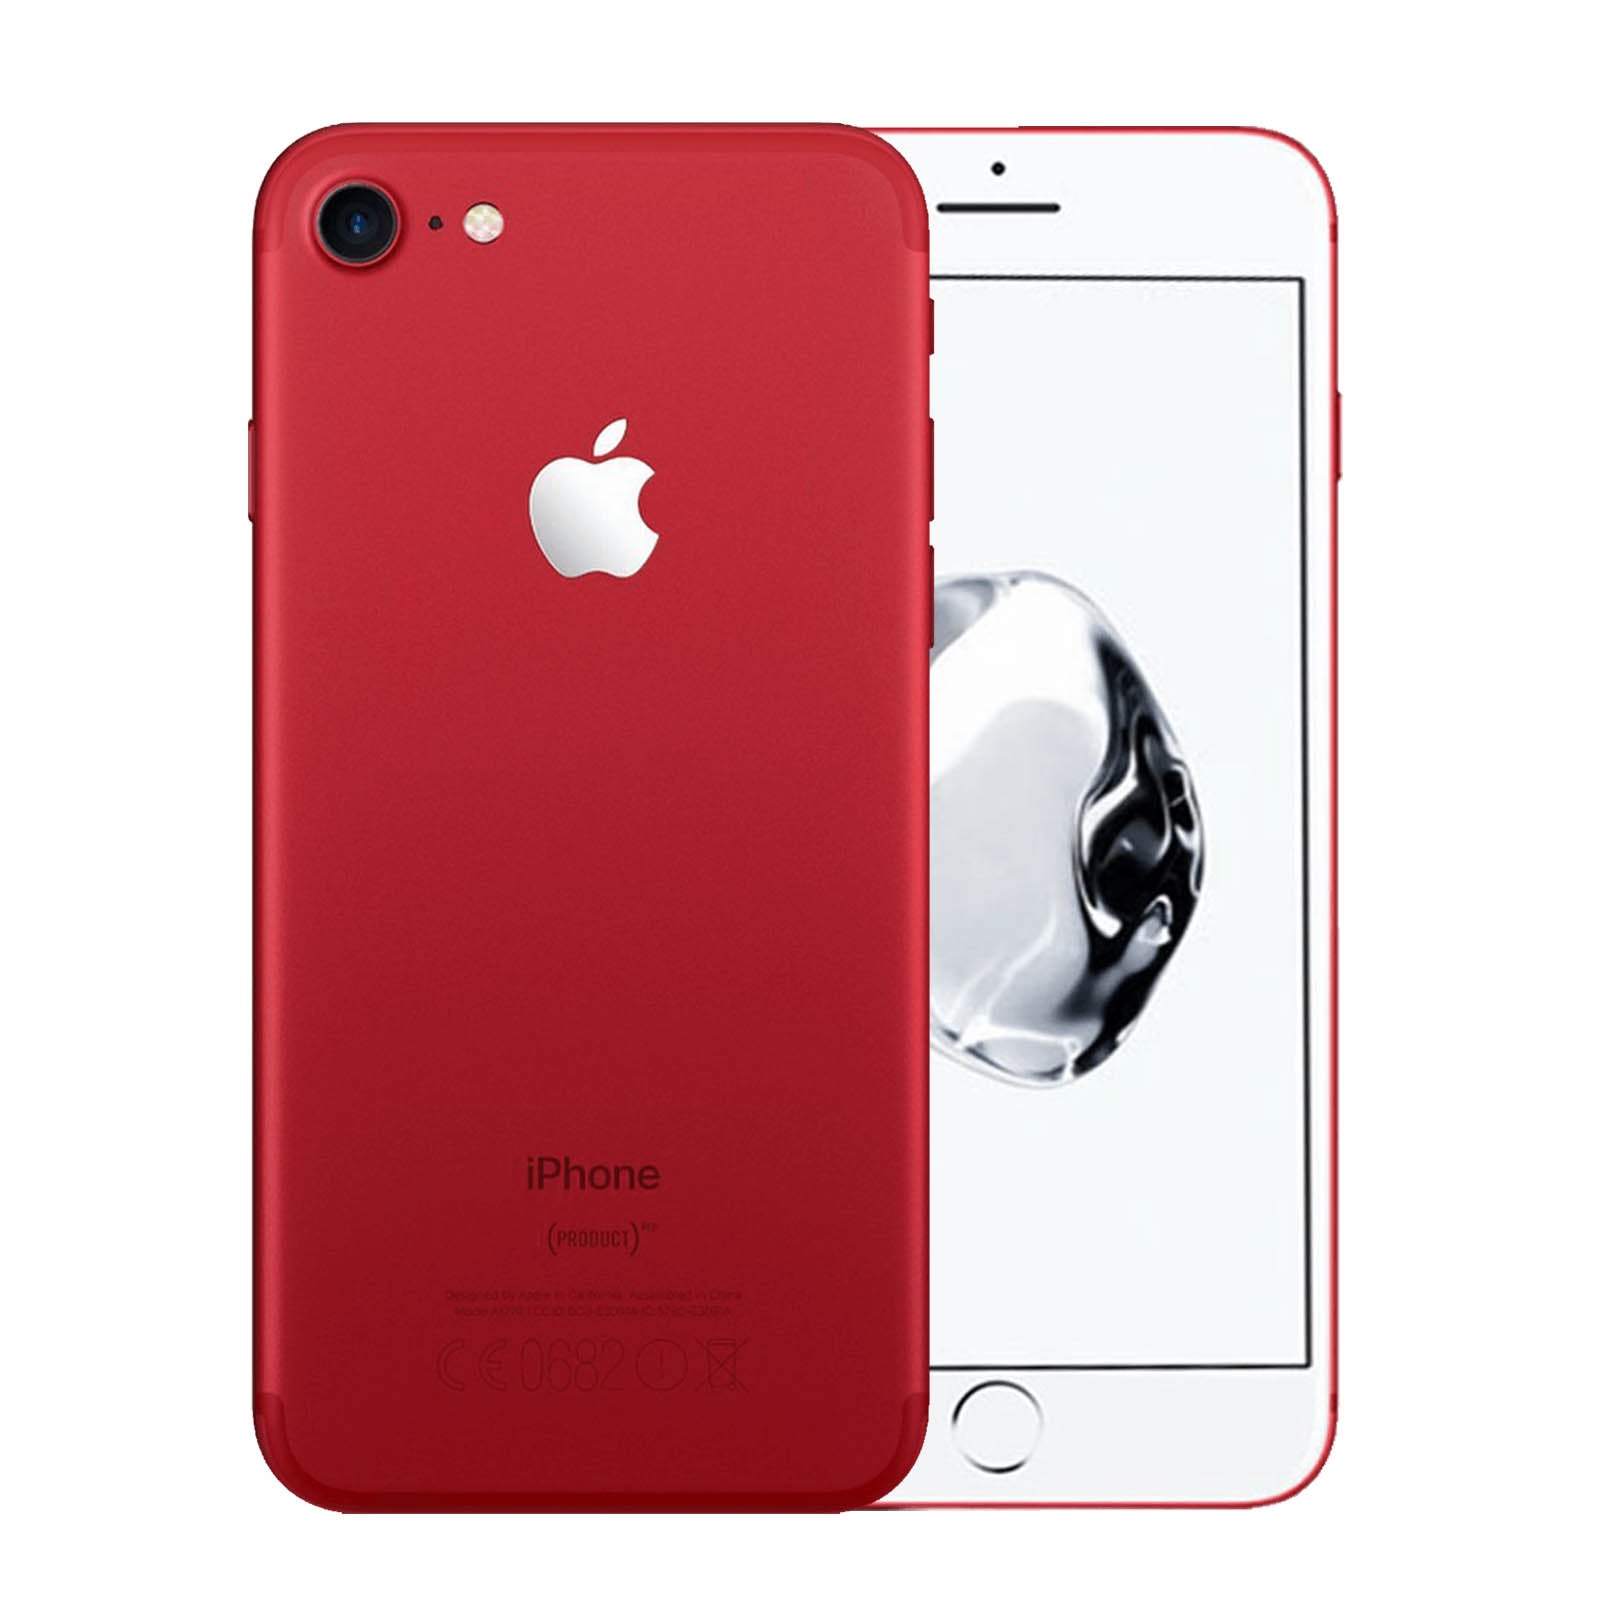 Apple iPhone 7 256GB Product Red Good - Unlocked